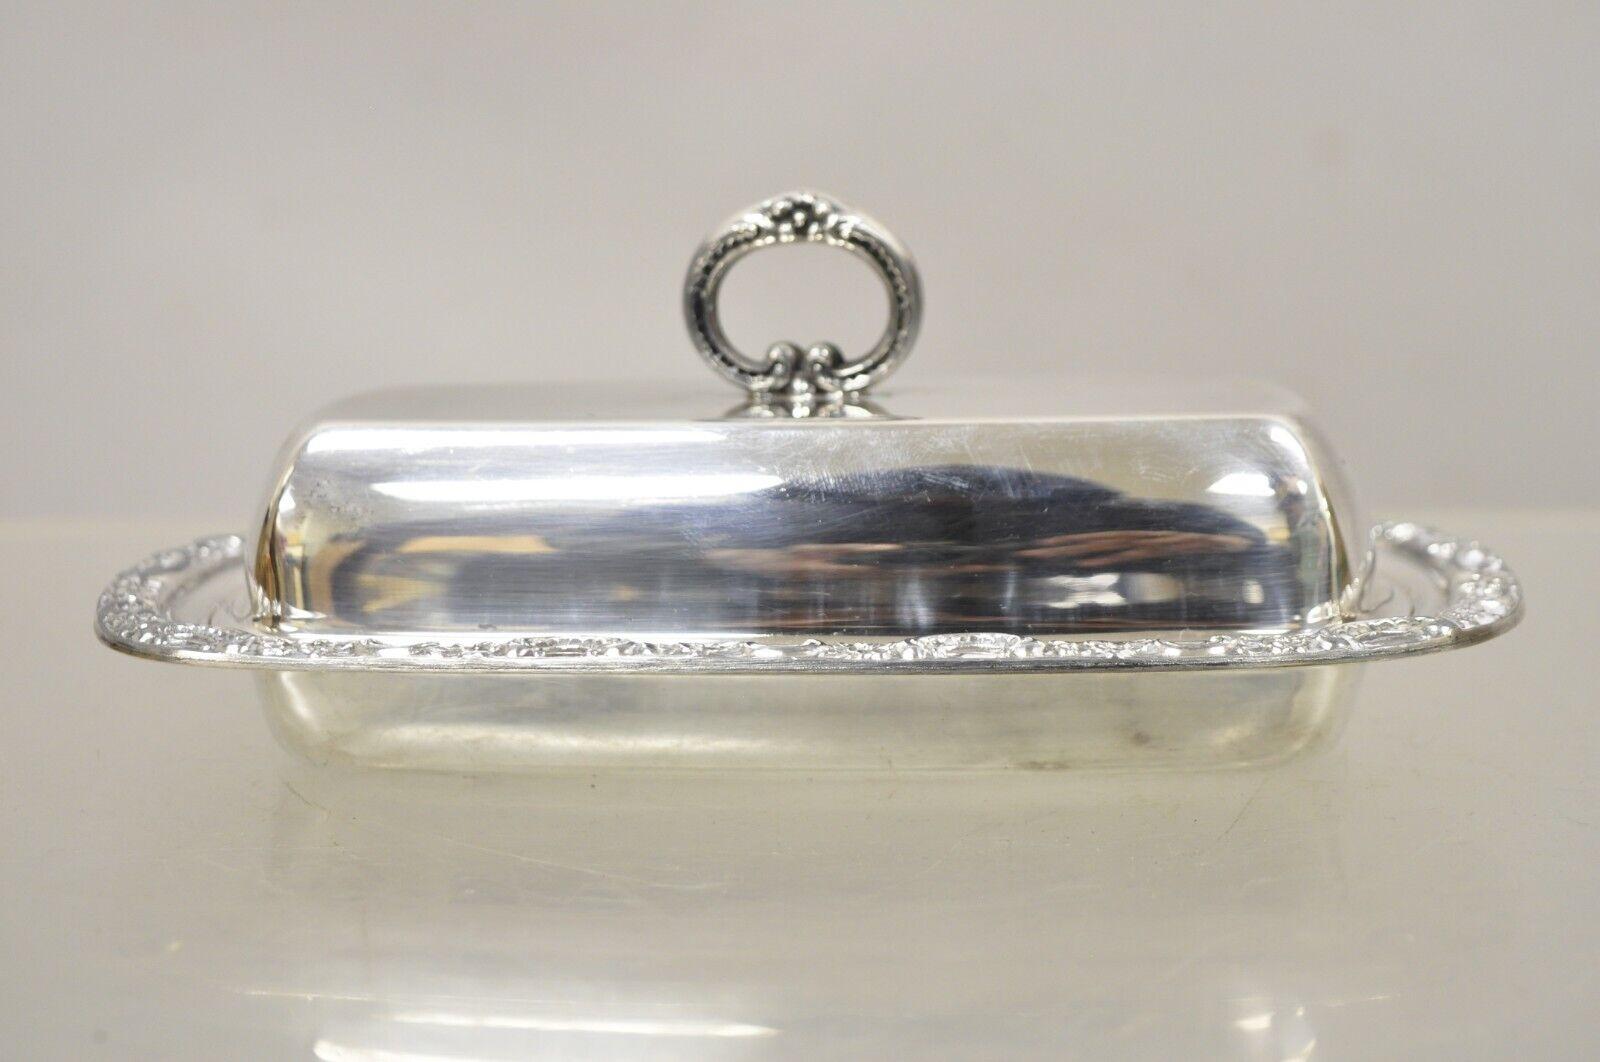 Vintage newport silver plated covered butler dish tray with lid. Circa Early to Mid 20th Century. Measurements: 3